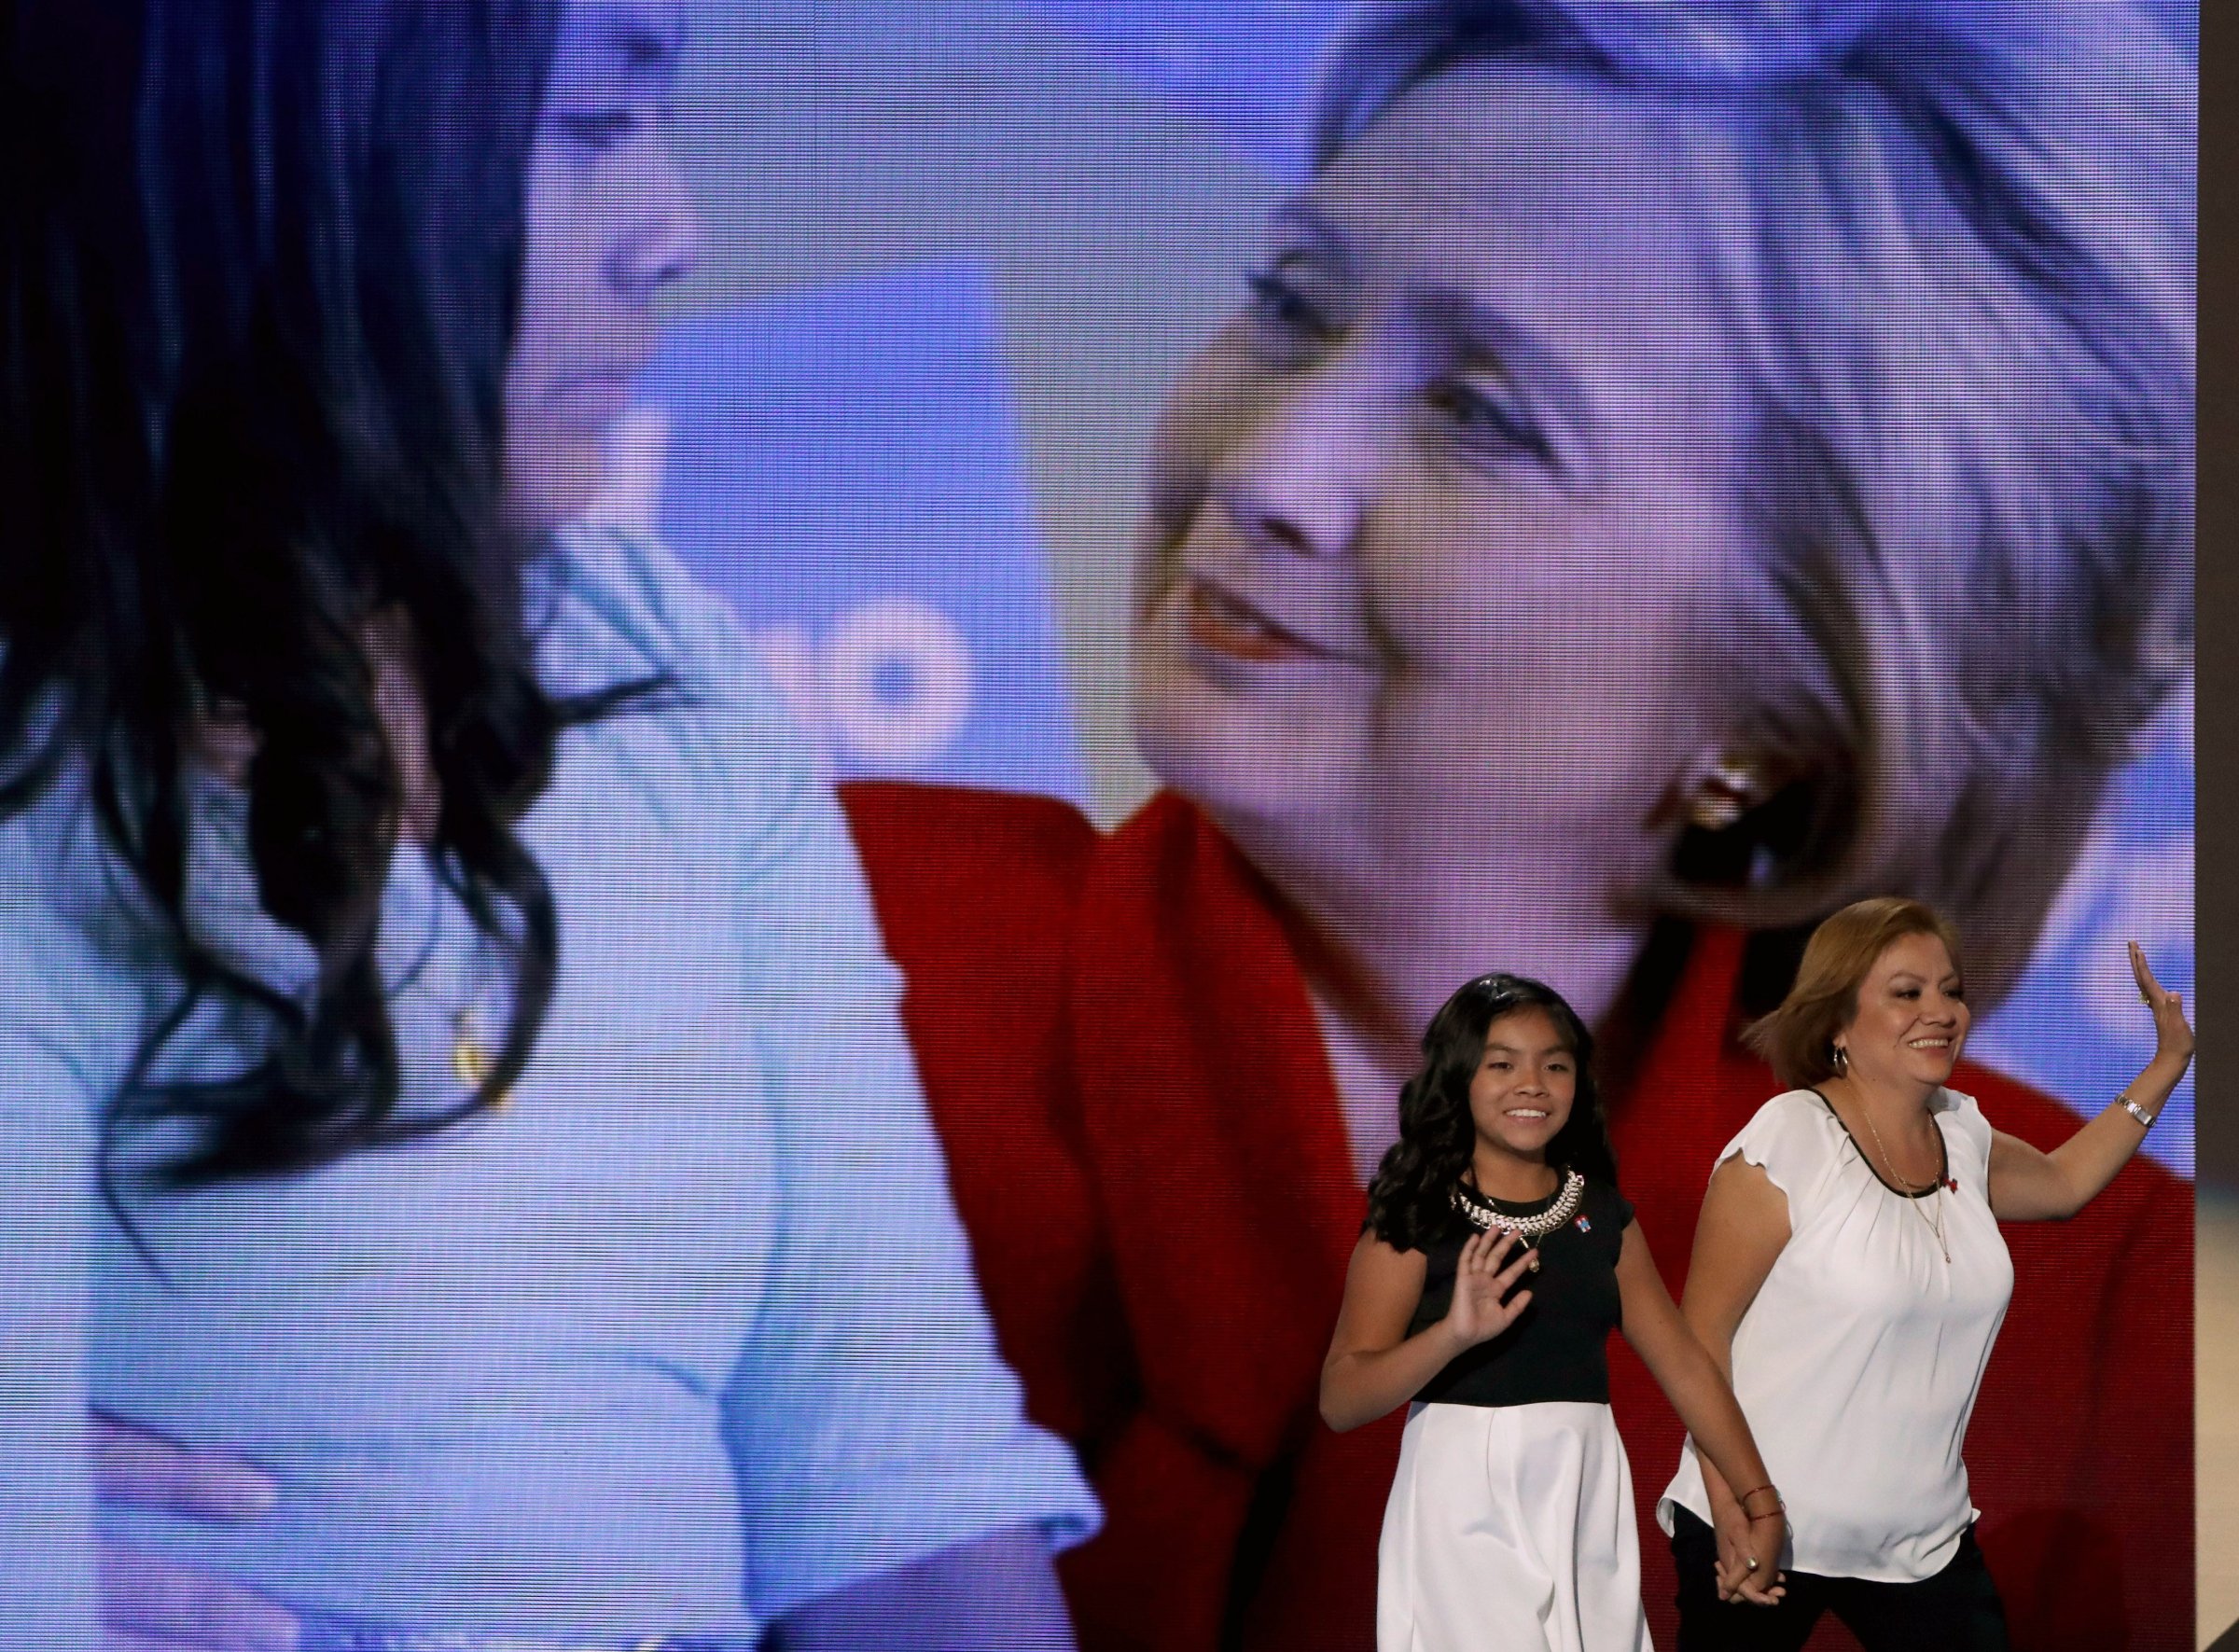 Karla Ortiz, 11, and her mother, Francisca Ortiz, walk out on stage to deliver remarks on the first day of the Democratic National Convention at the Wells Fargo Center, July 25, 2016 in Philadelphia.